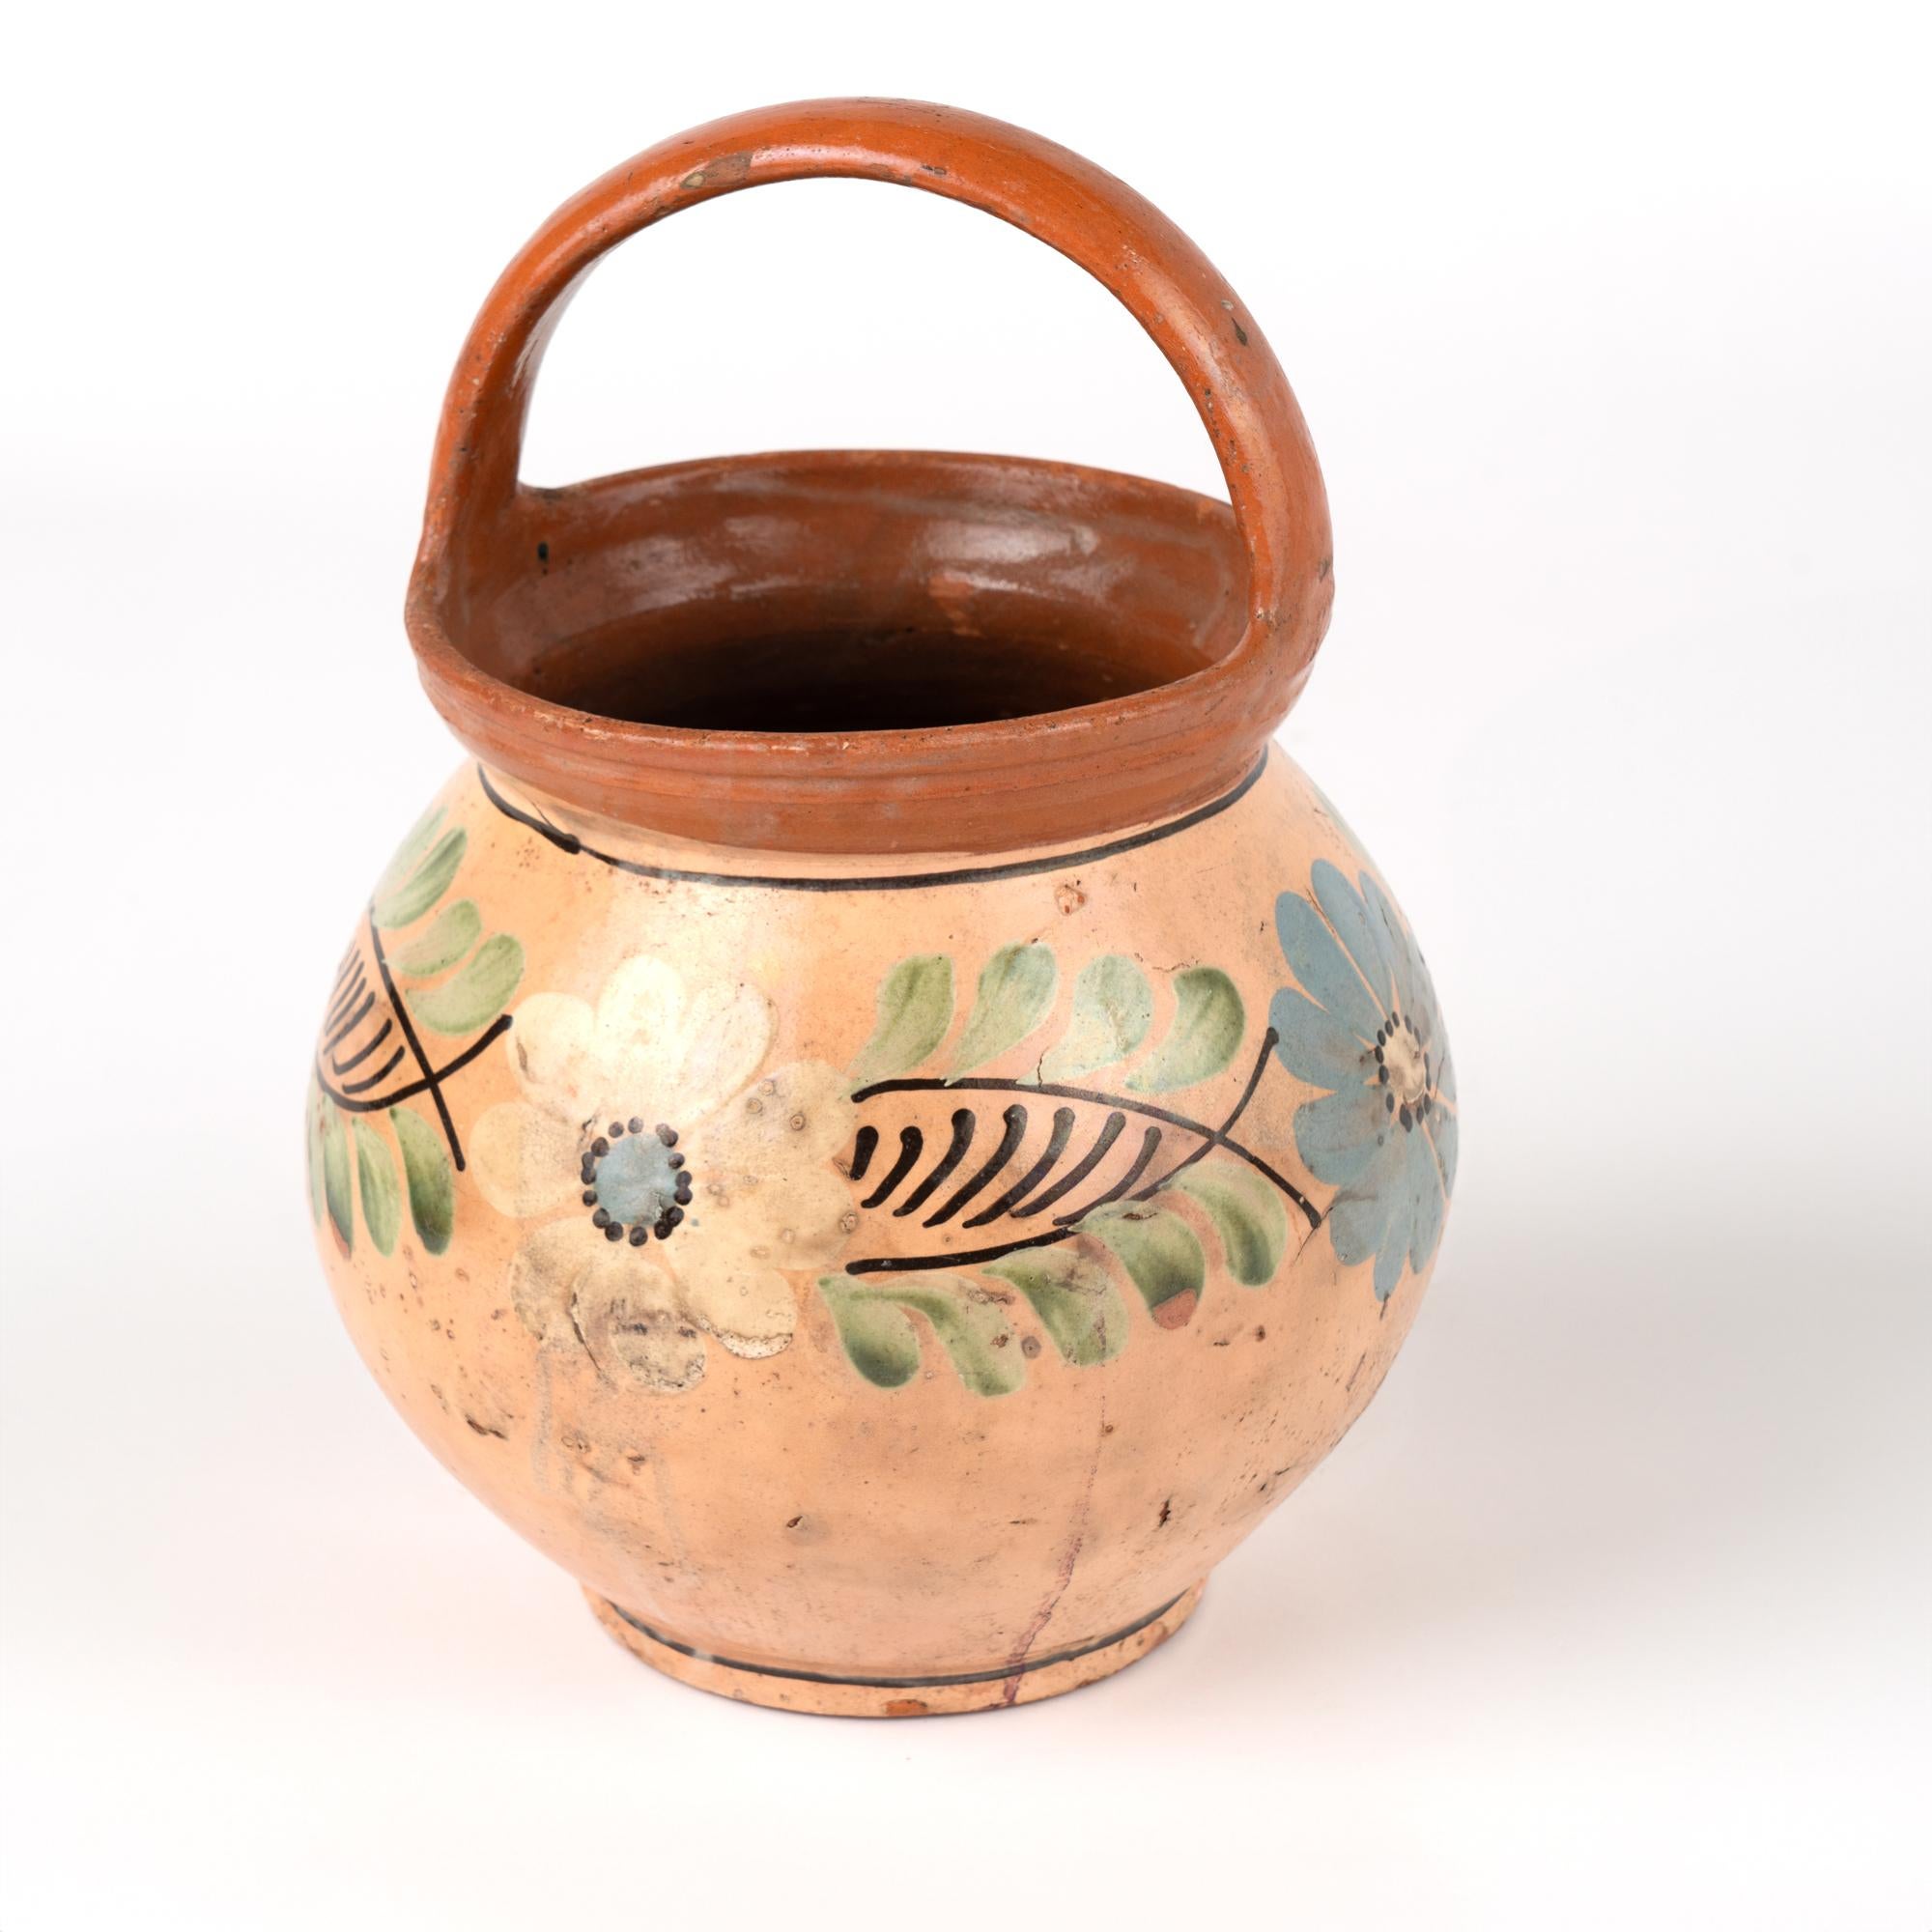 Rustic Hand Painted Earthenware Pottery With Arched Handle, Hungary 1900's For Sale